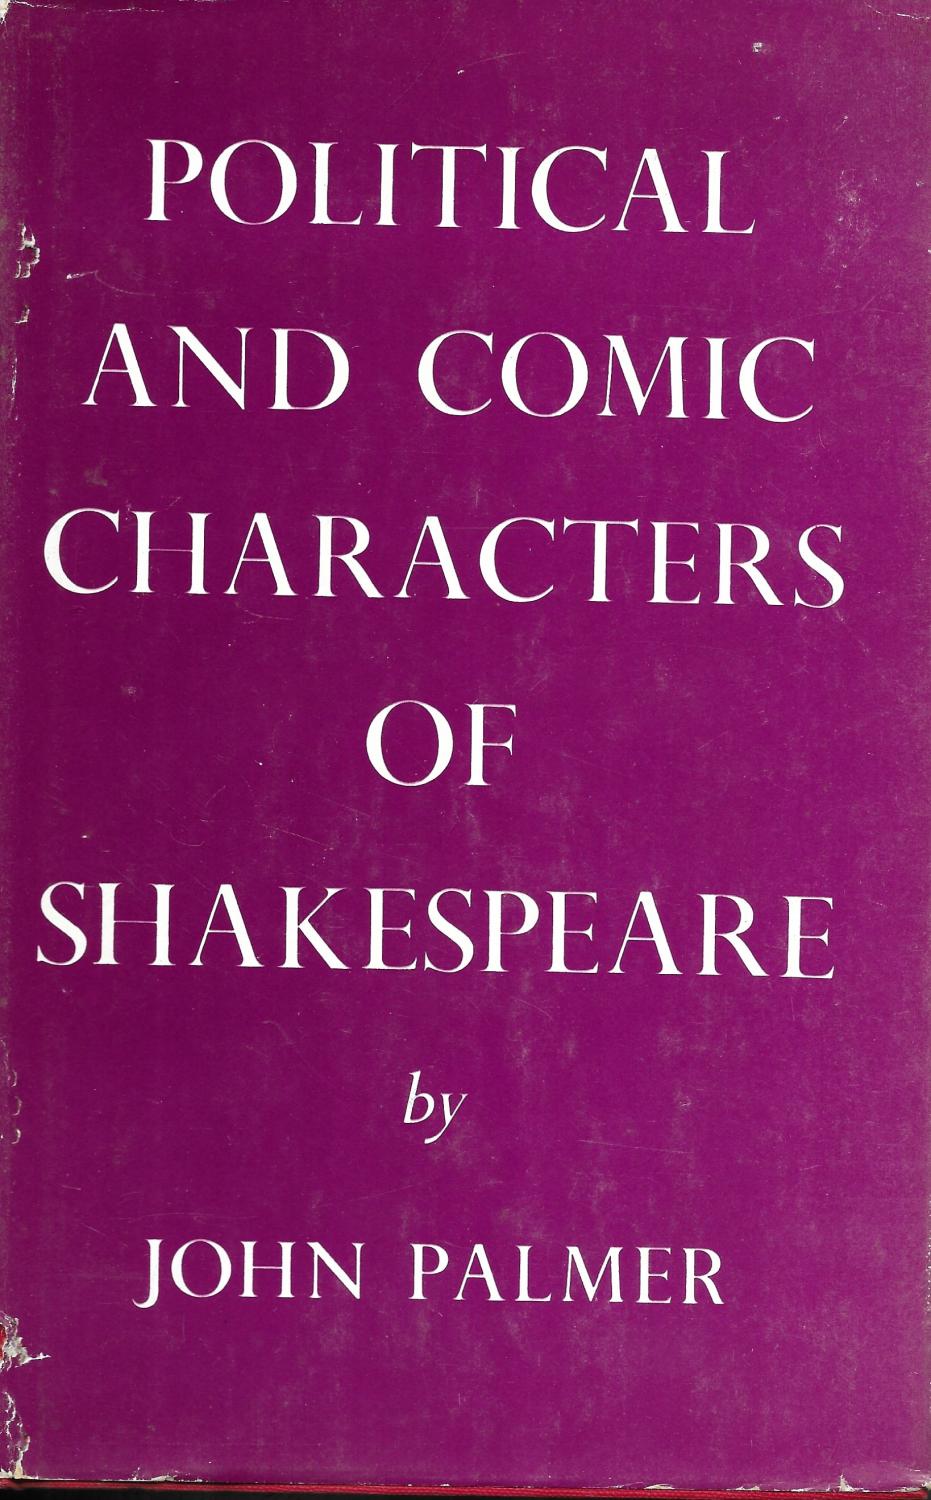 Political and Comic Characters of Shakespeare (Papermacs)